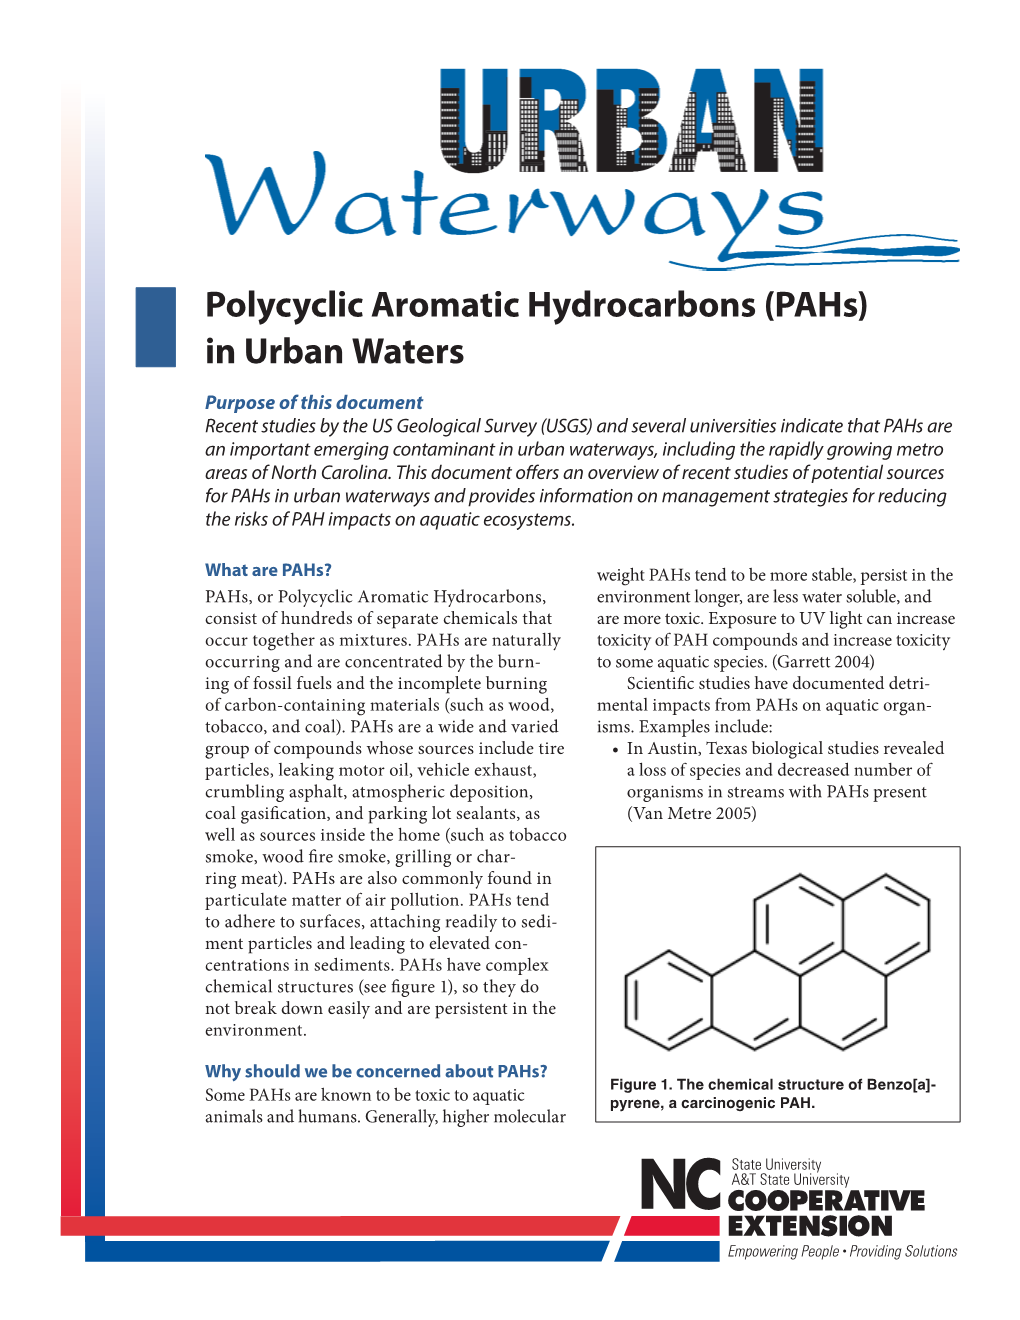 Polycyclic Aromatic Hydrocarbons (Pahs) in Urban Waters